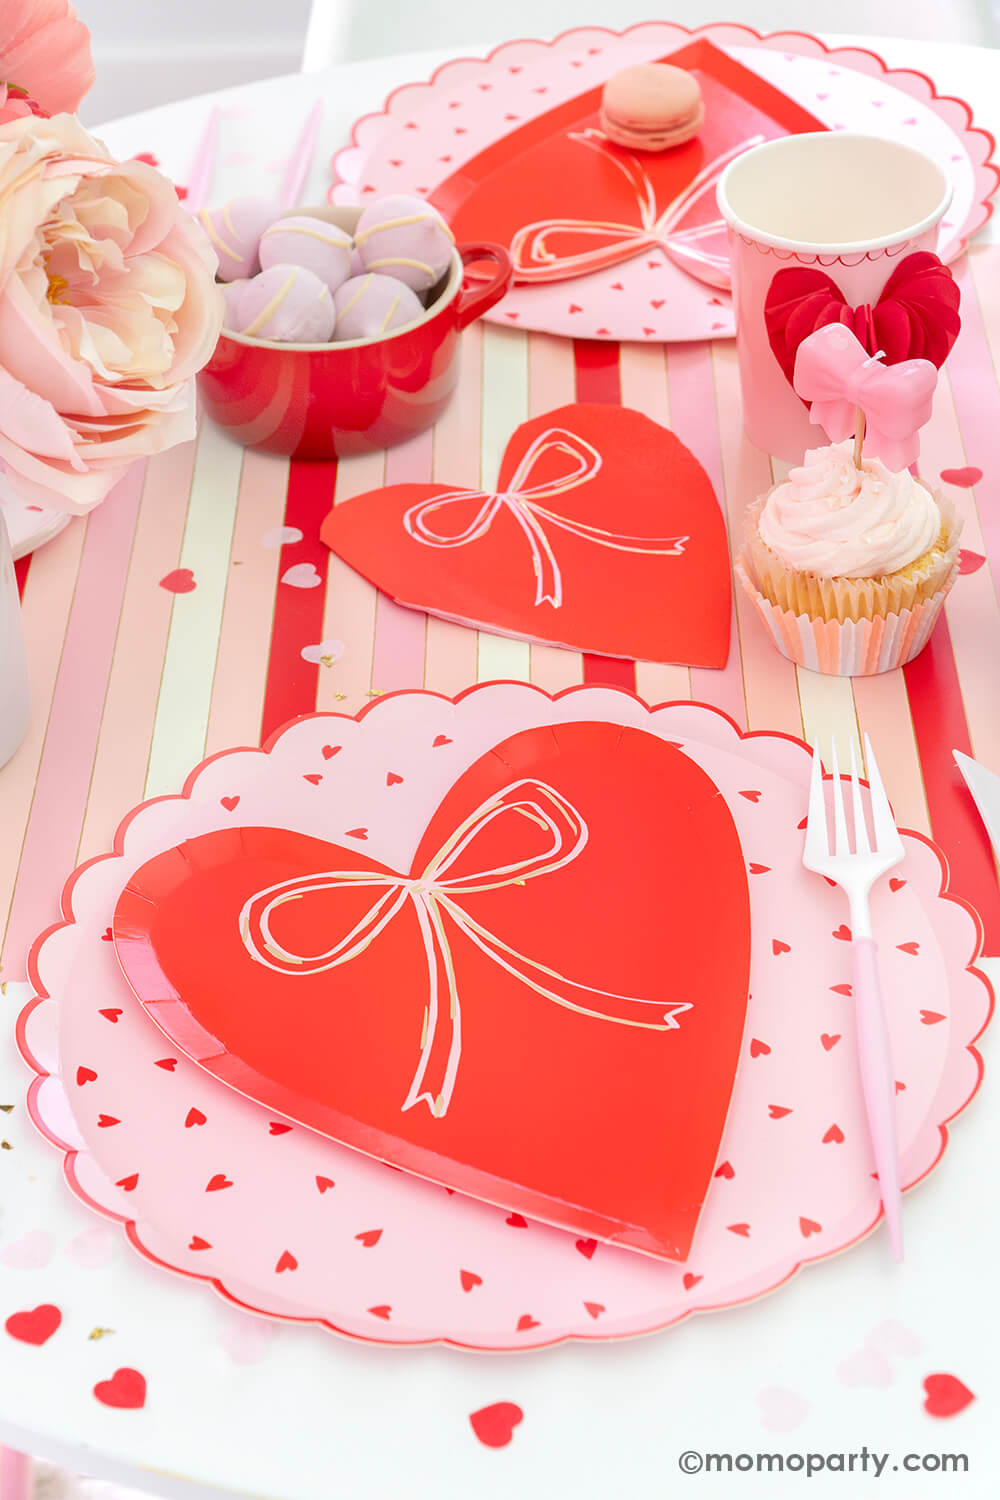 Momo Party presents a sweet Pink and Red Bow-Themed Valentine's Day Party table. Featuring Meri Meri Heart With Bow Plates layered with Heart Pattern Dinner Plates, Heart With Bow Napkins, Honeycomb Heart Cups, Blush and White Cutlery Set, Pink Bow Candles atop cupcakes, and sweets in the red Mini Cocotte. All elegantly arranged on a red-striped paper runner, sprinkled around Kisses Artisan Confetti. Such a cute idea for elevating your Valentine's celebration or Galentine's Day with your besties